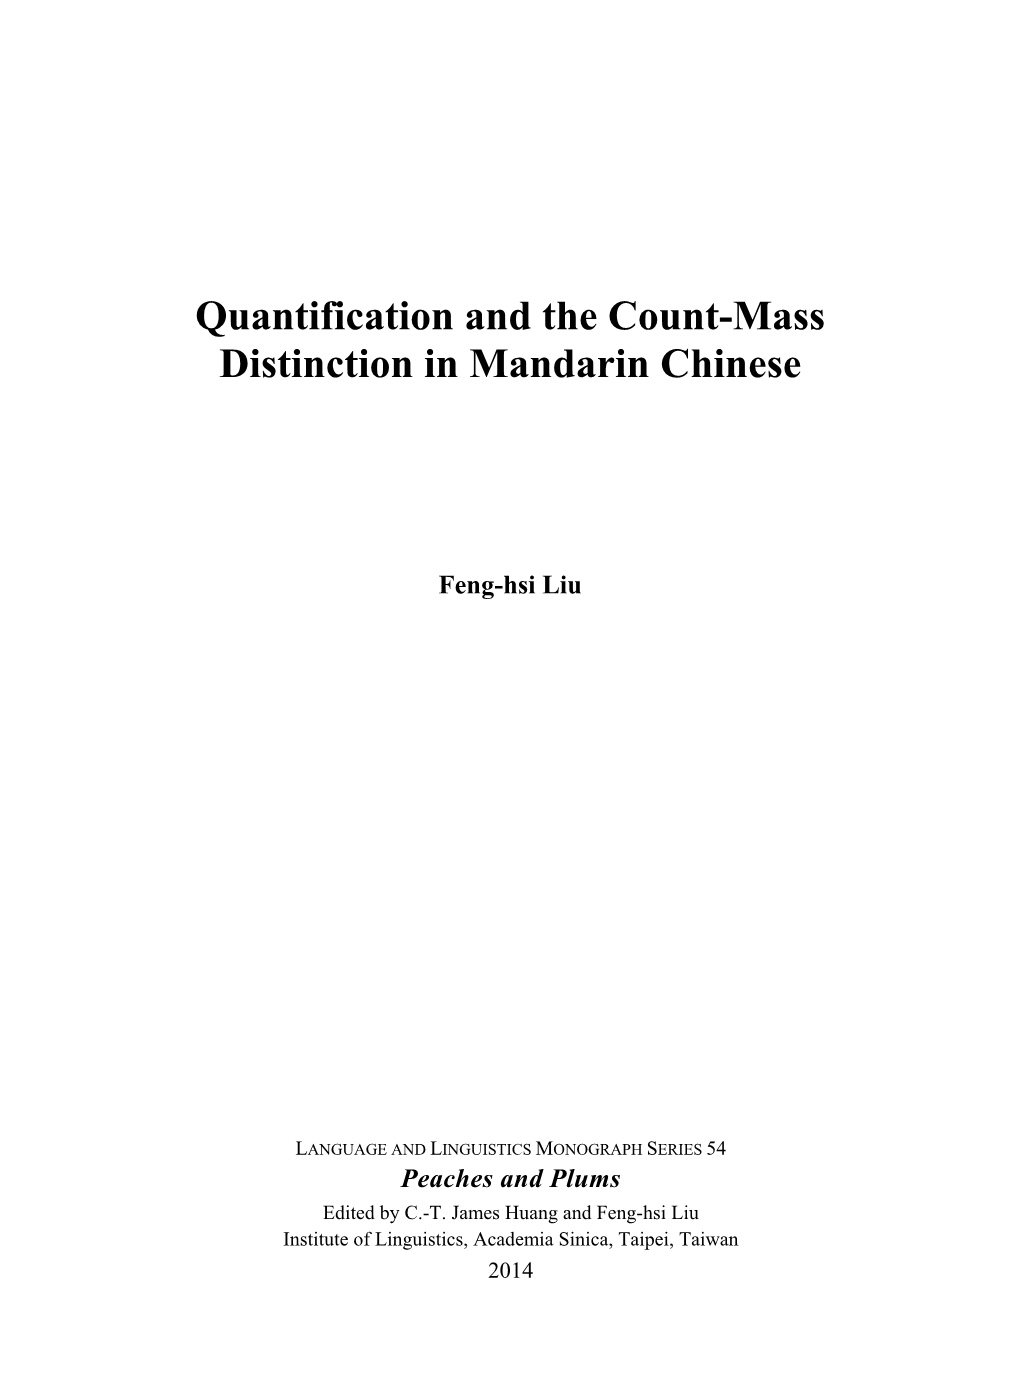 Quantification and the Count-Mass Distinction in Mandarin Chinese